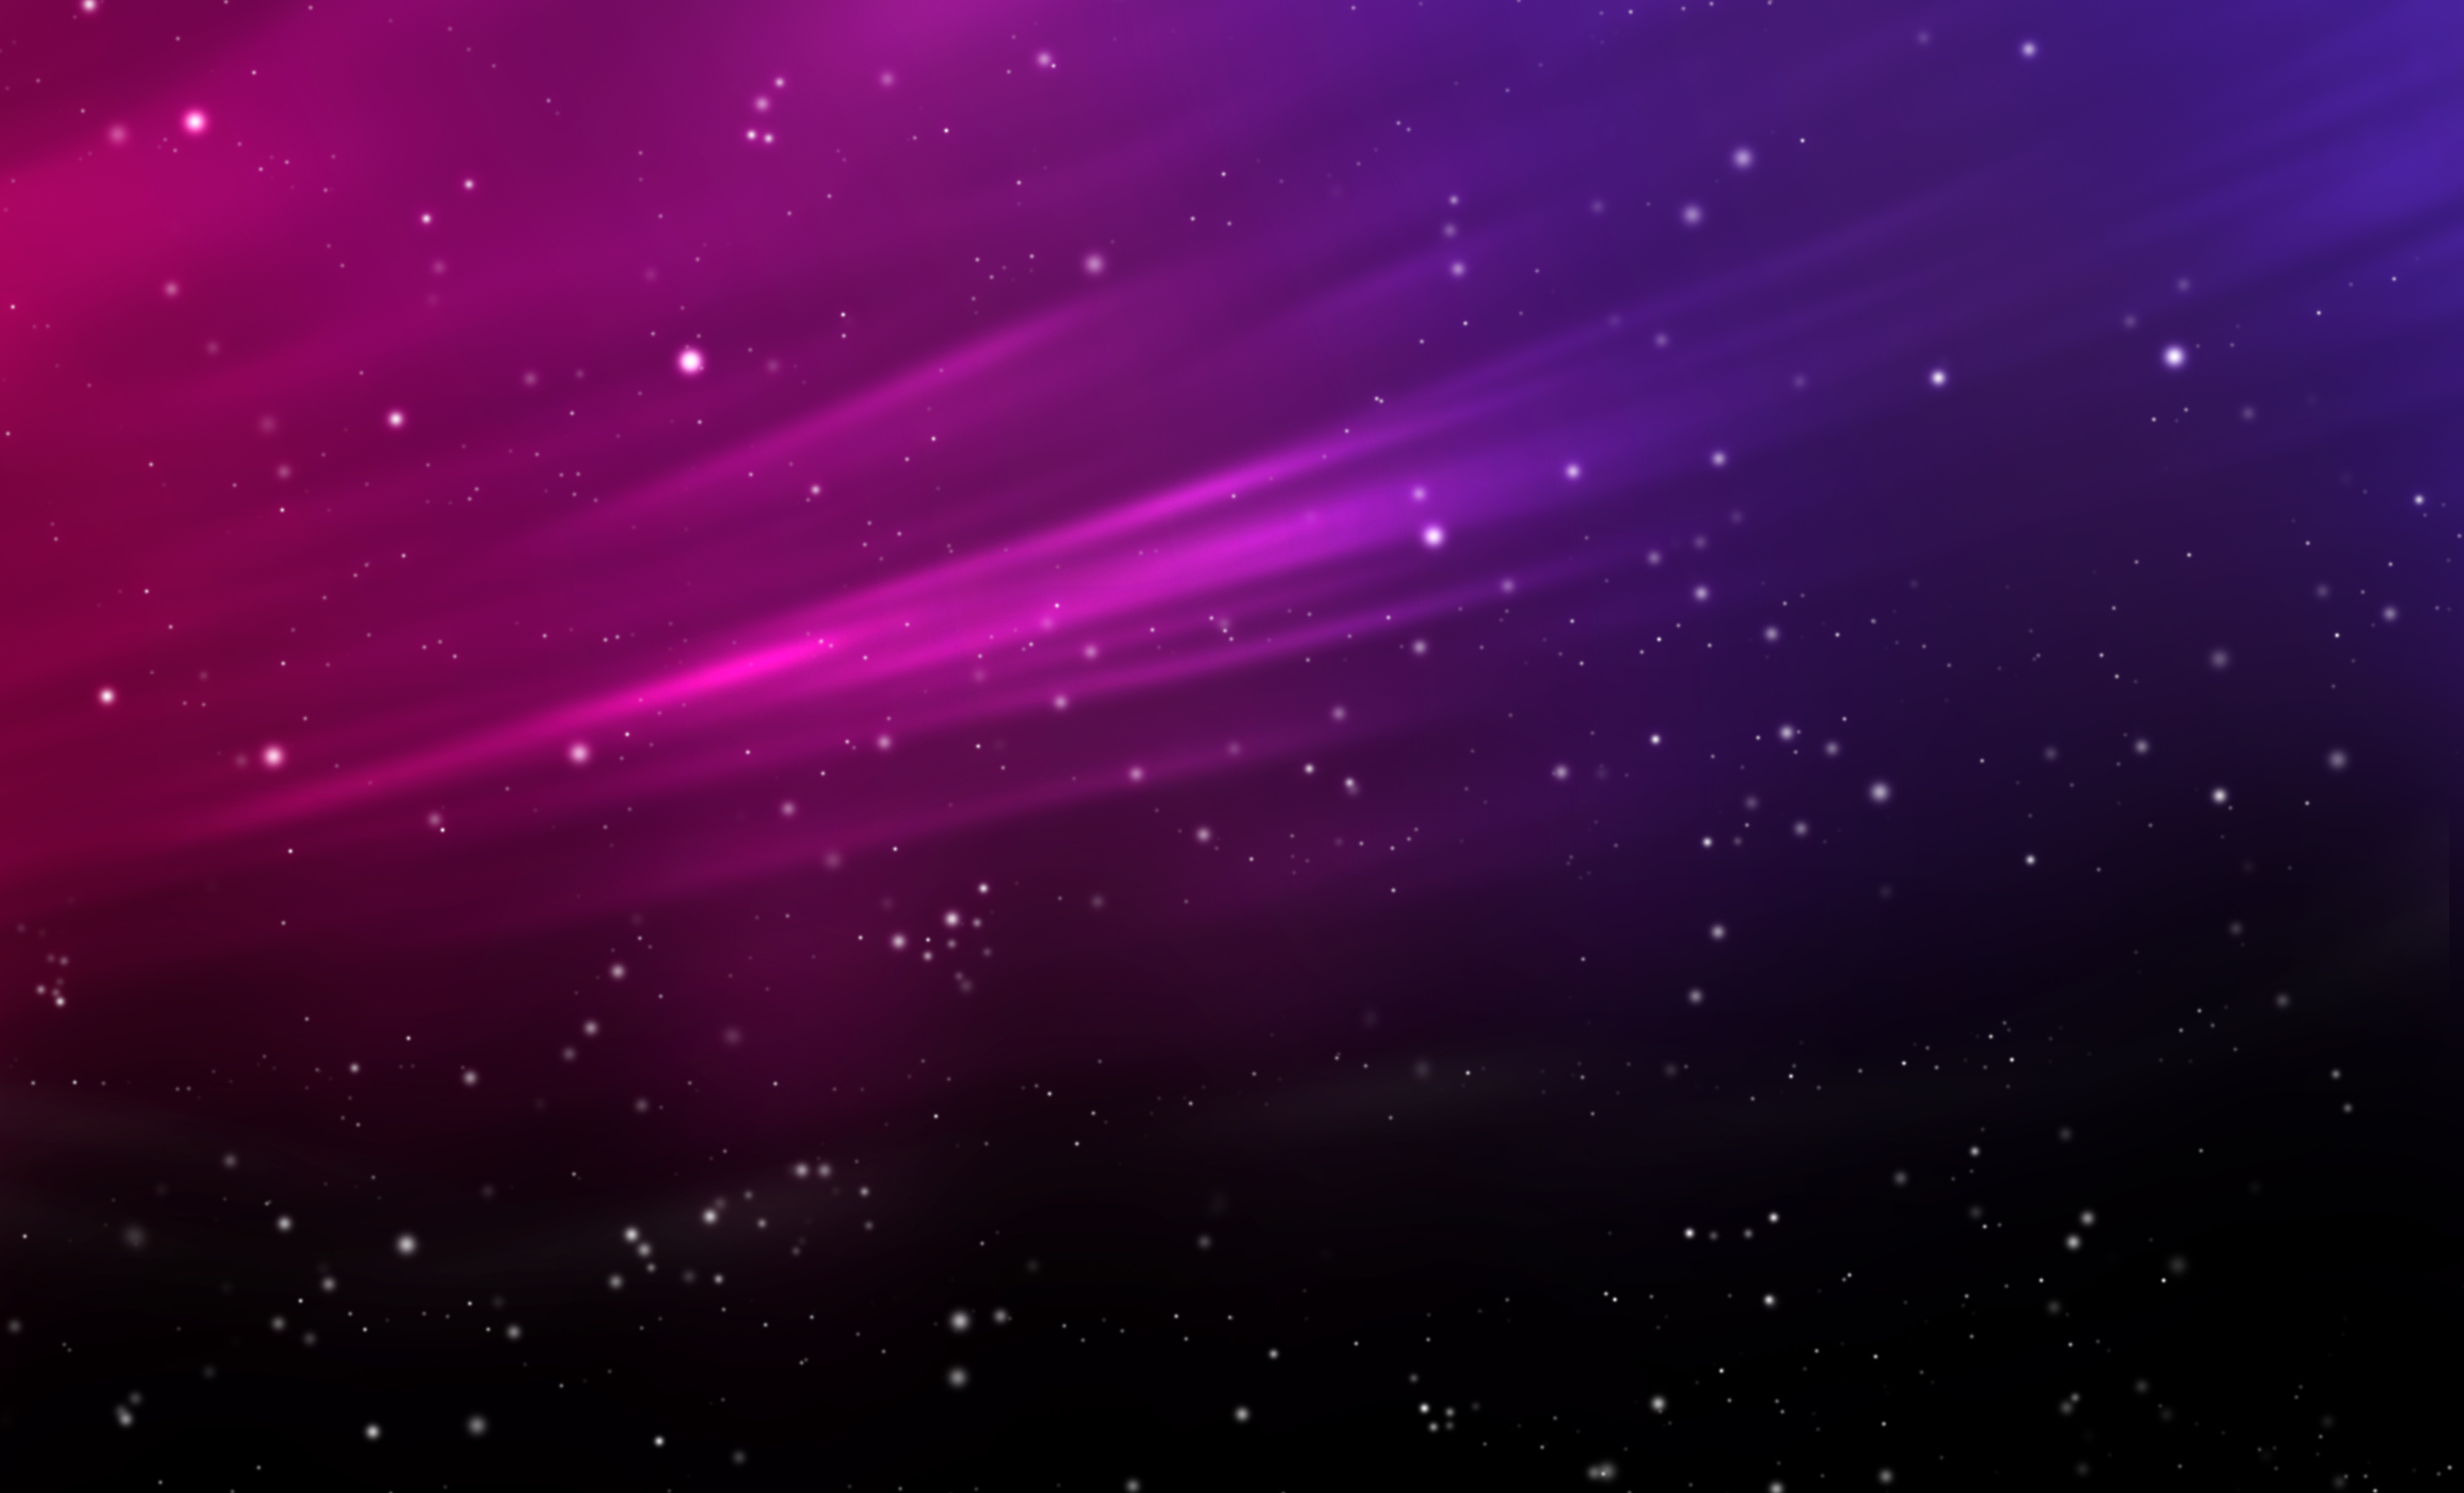  Pink Purple HD Wallpapers Backgrounds